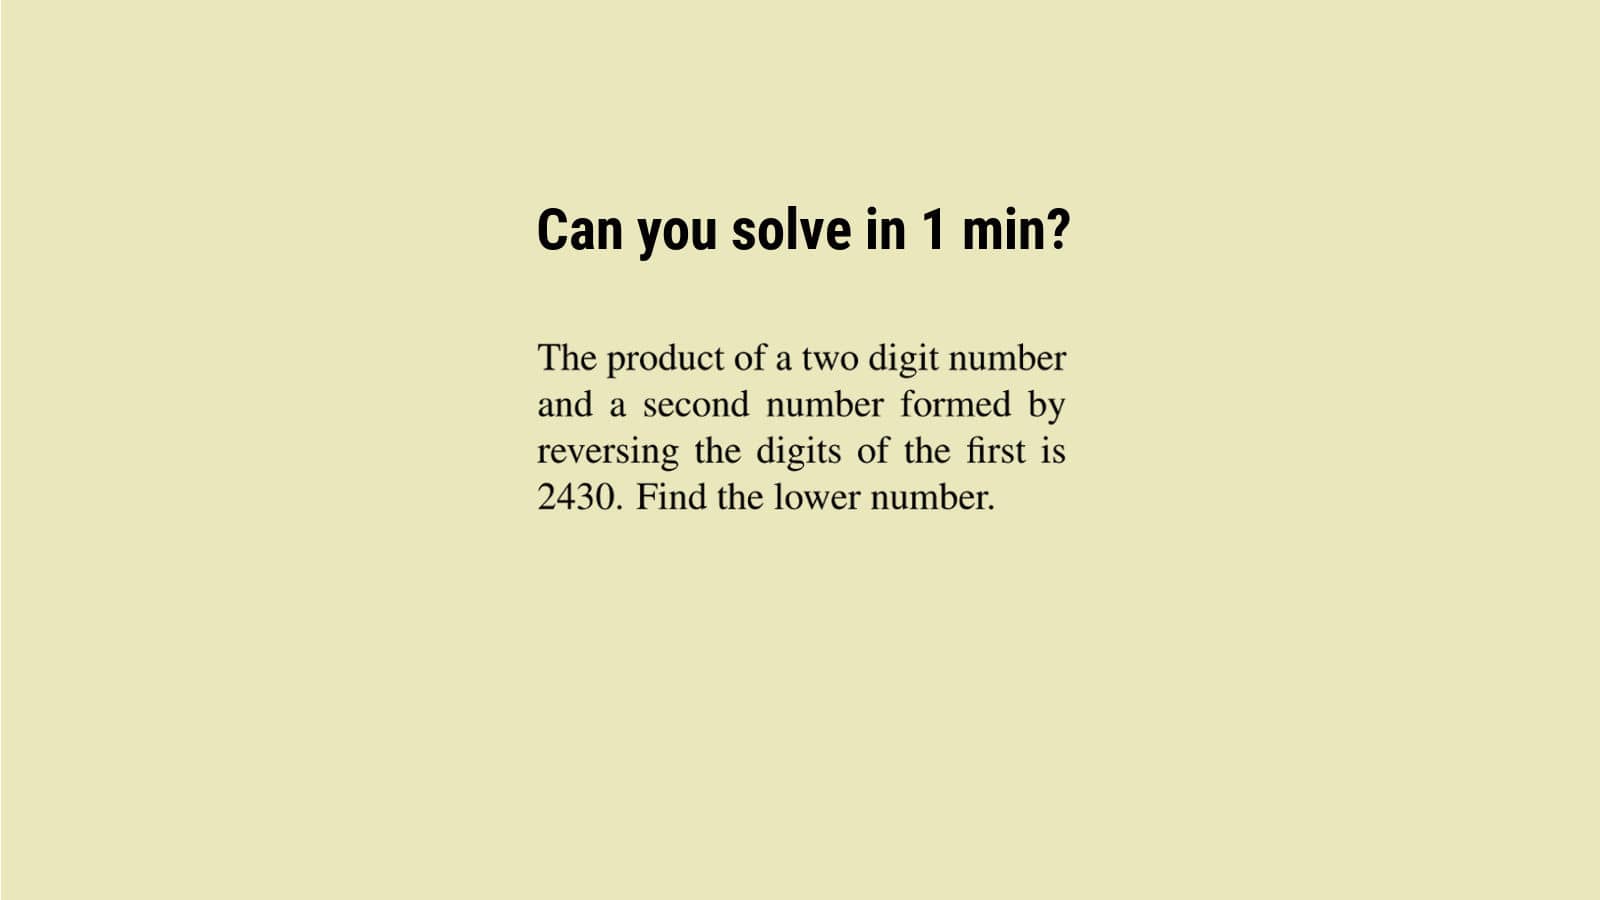 How to solve the number system puzzle problem 6 in 1 minute